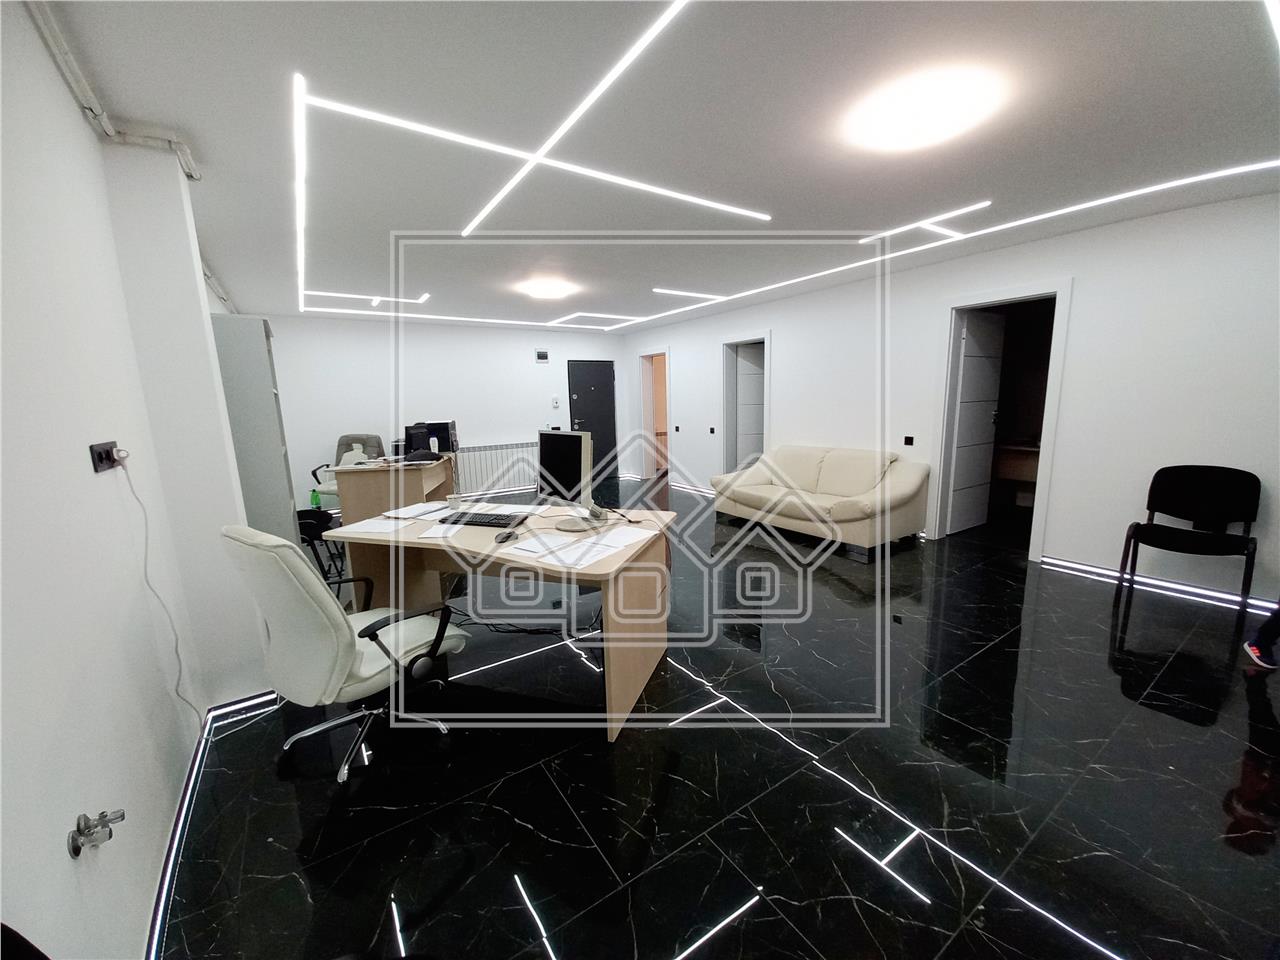 Office space for sale in Alba Iulia - 2 rooms - parking space